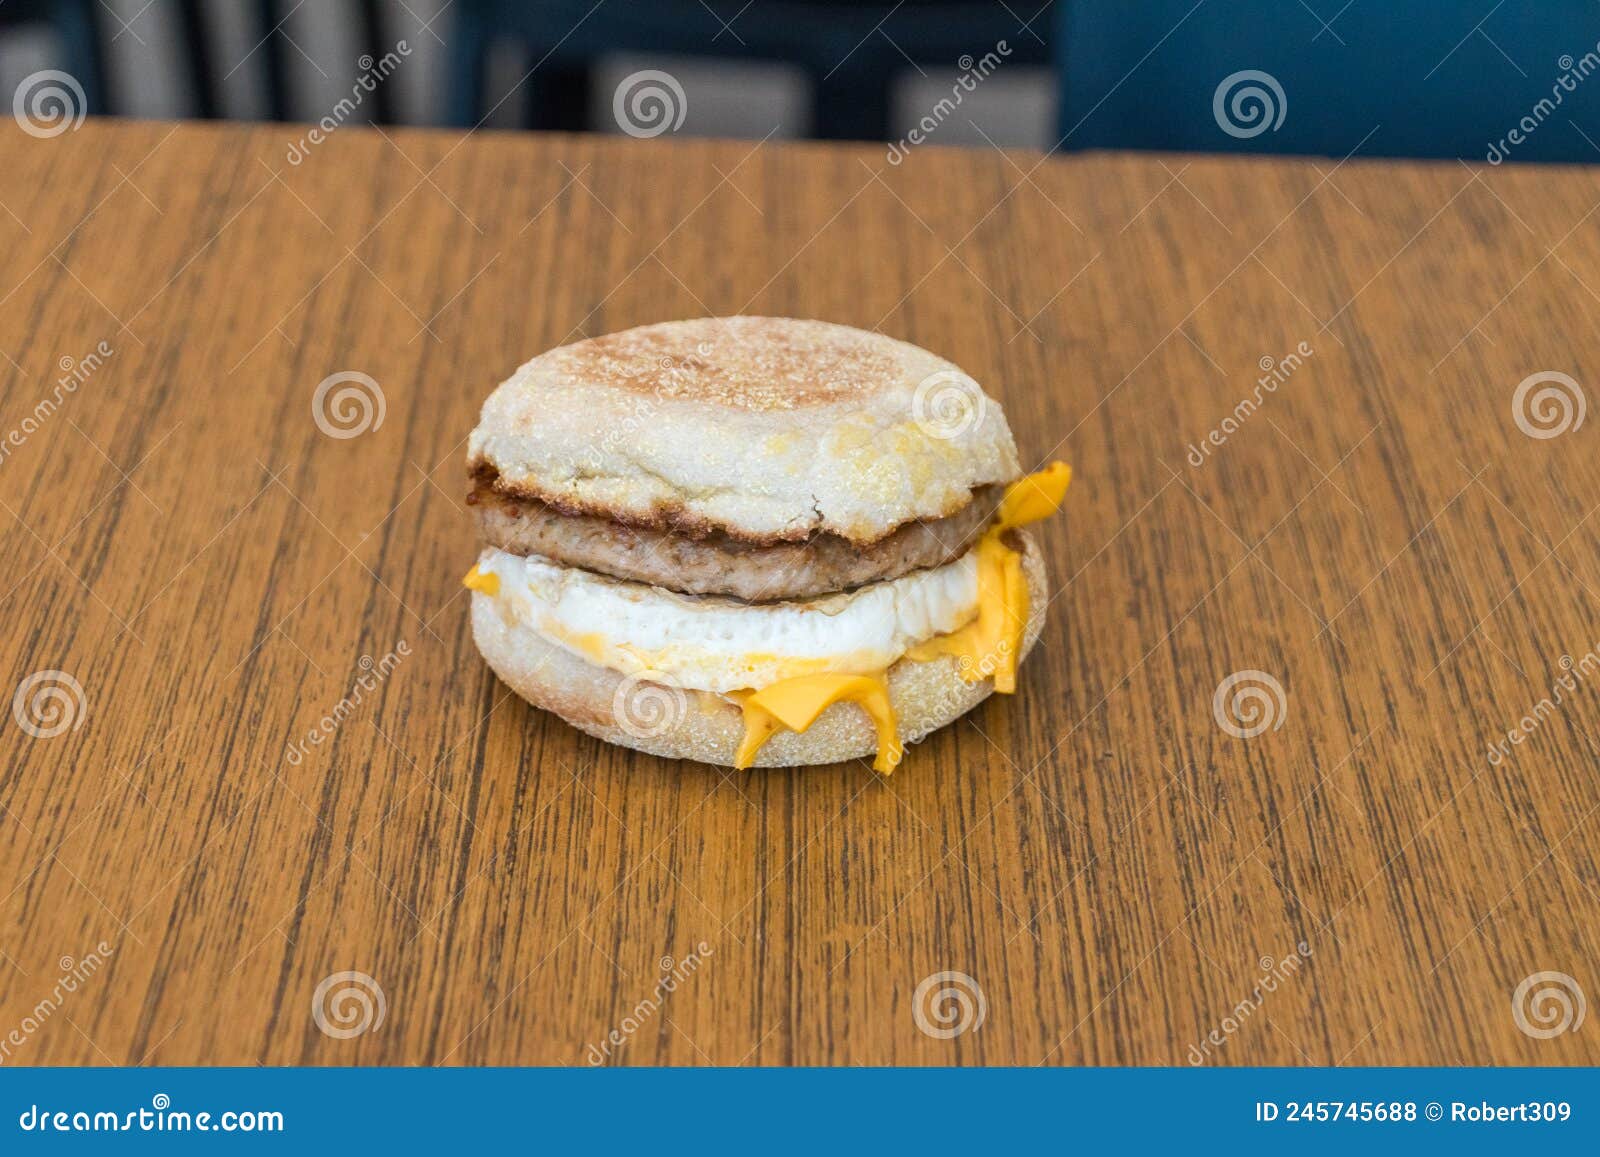 mcdonalds mcmuffin with pork and egg. mcmuffin is breakfast sandwich in mcdonald